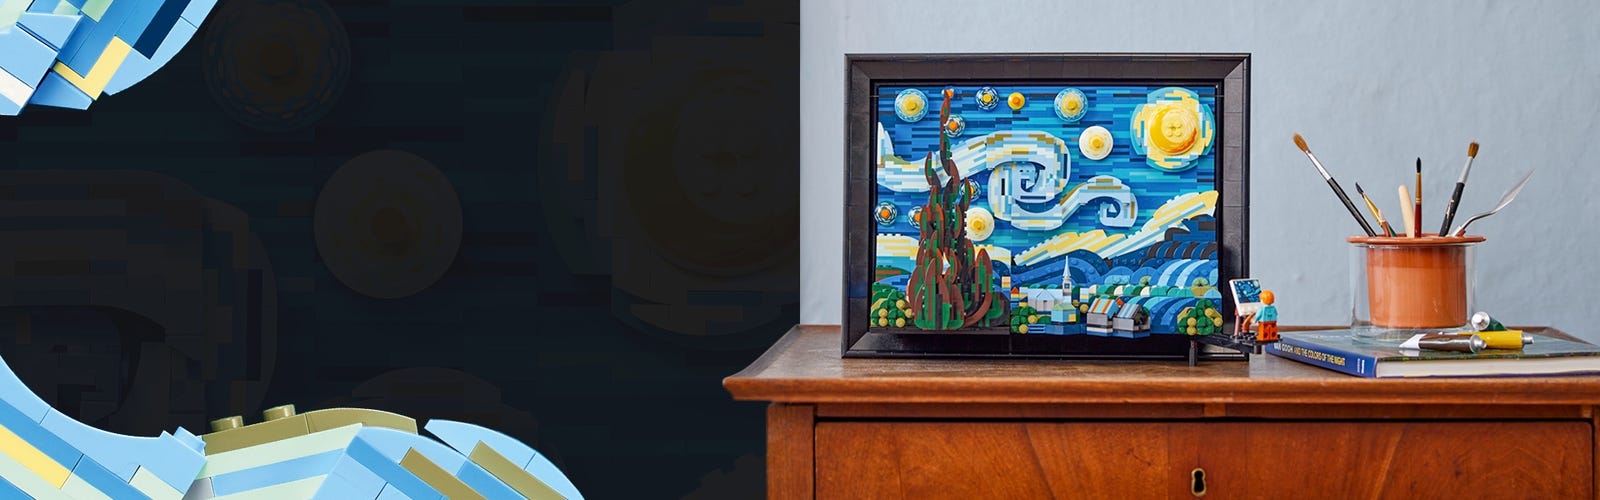 New LEGO Vincent Van Gogh Minifigure idea106 21333 The Starry Night  Painting